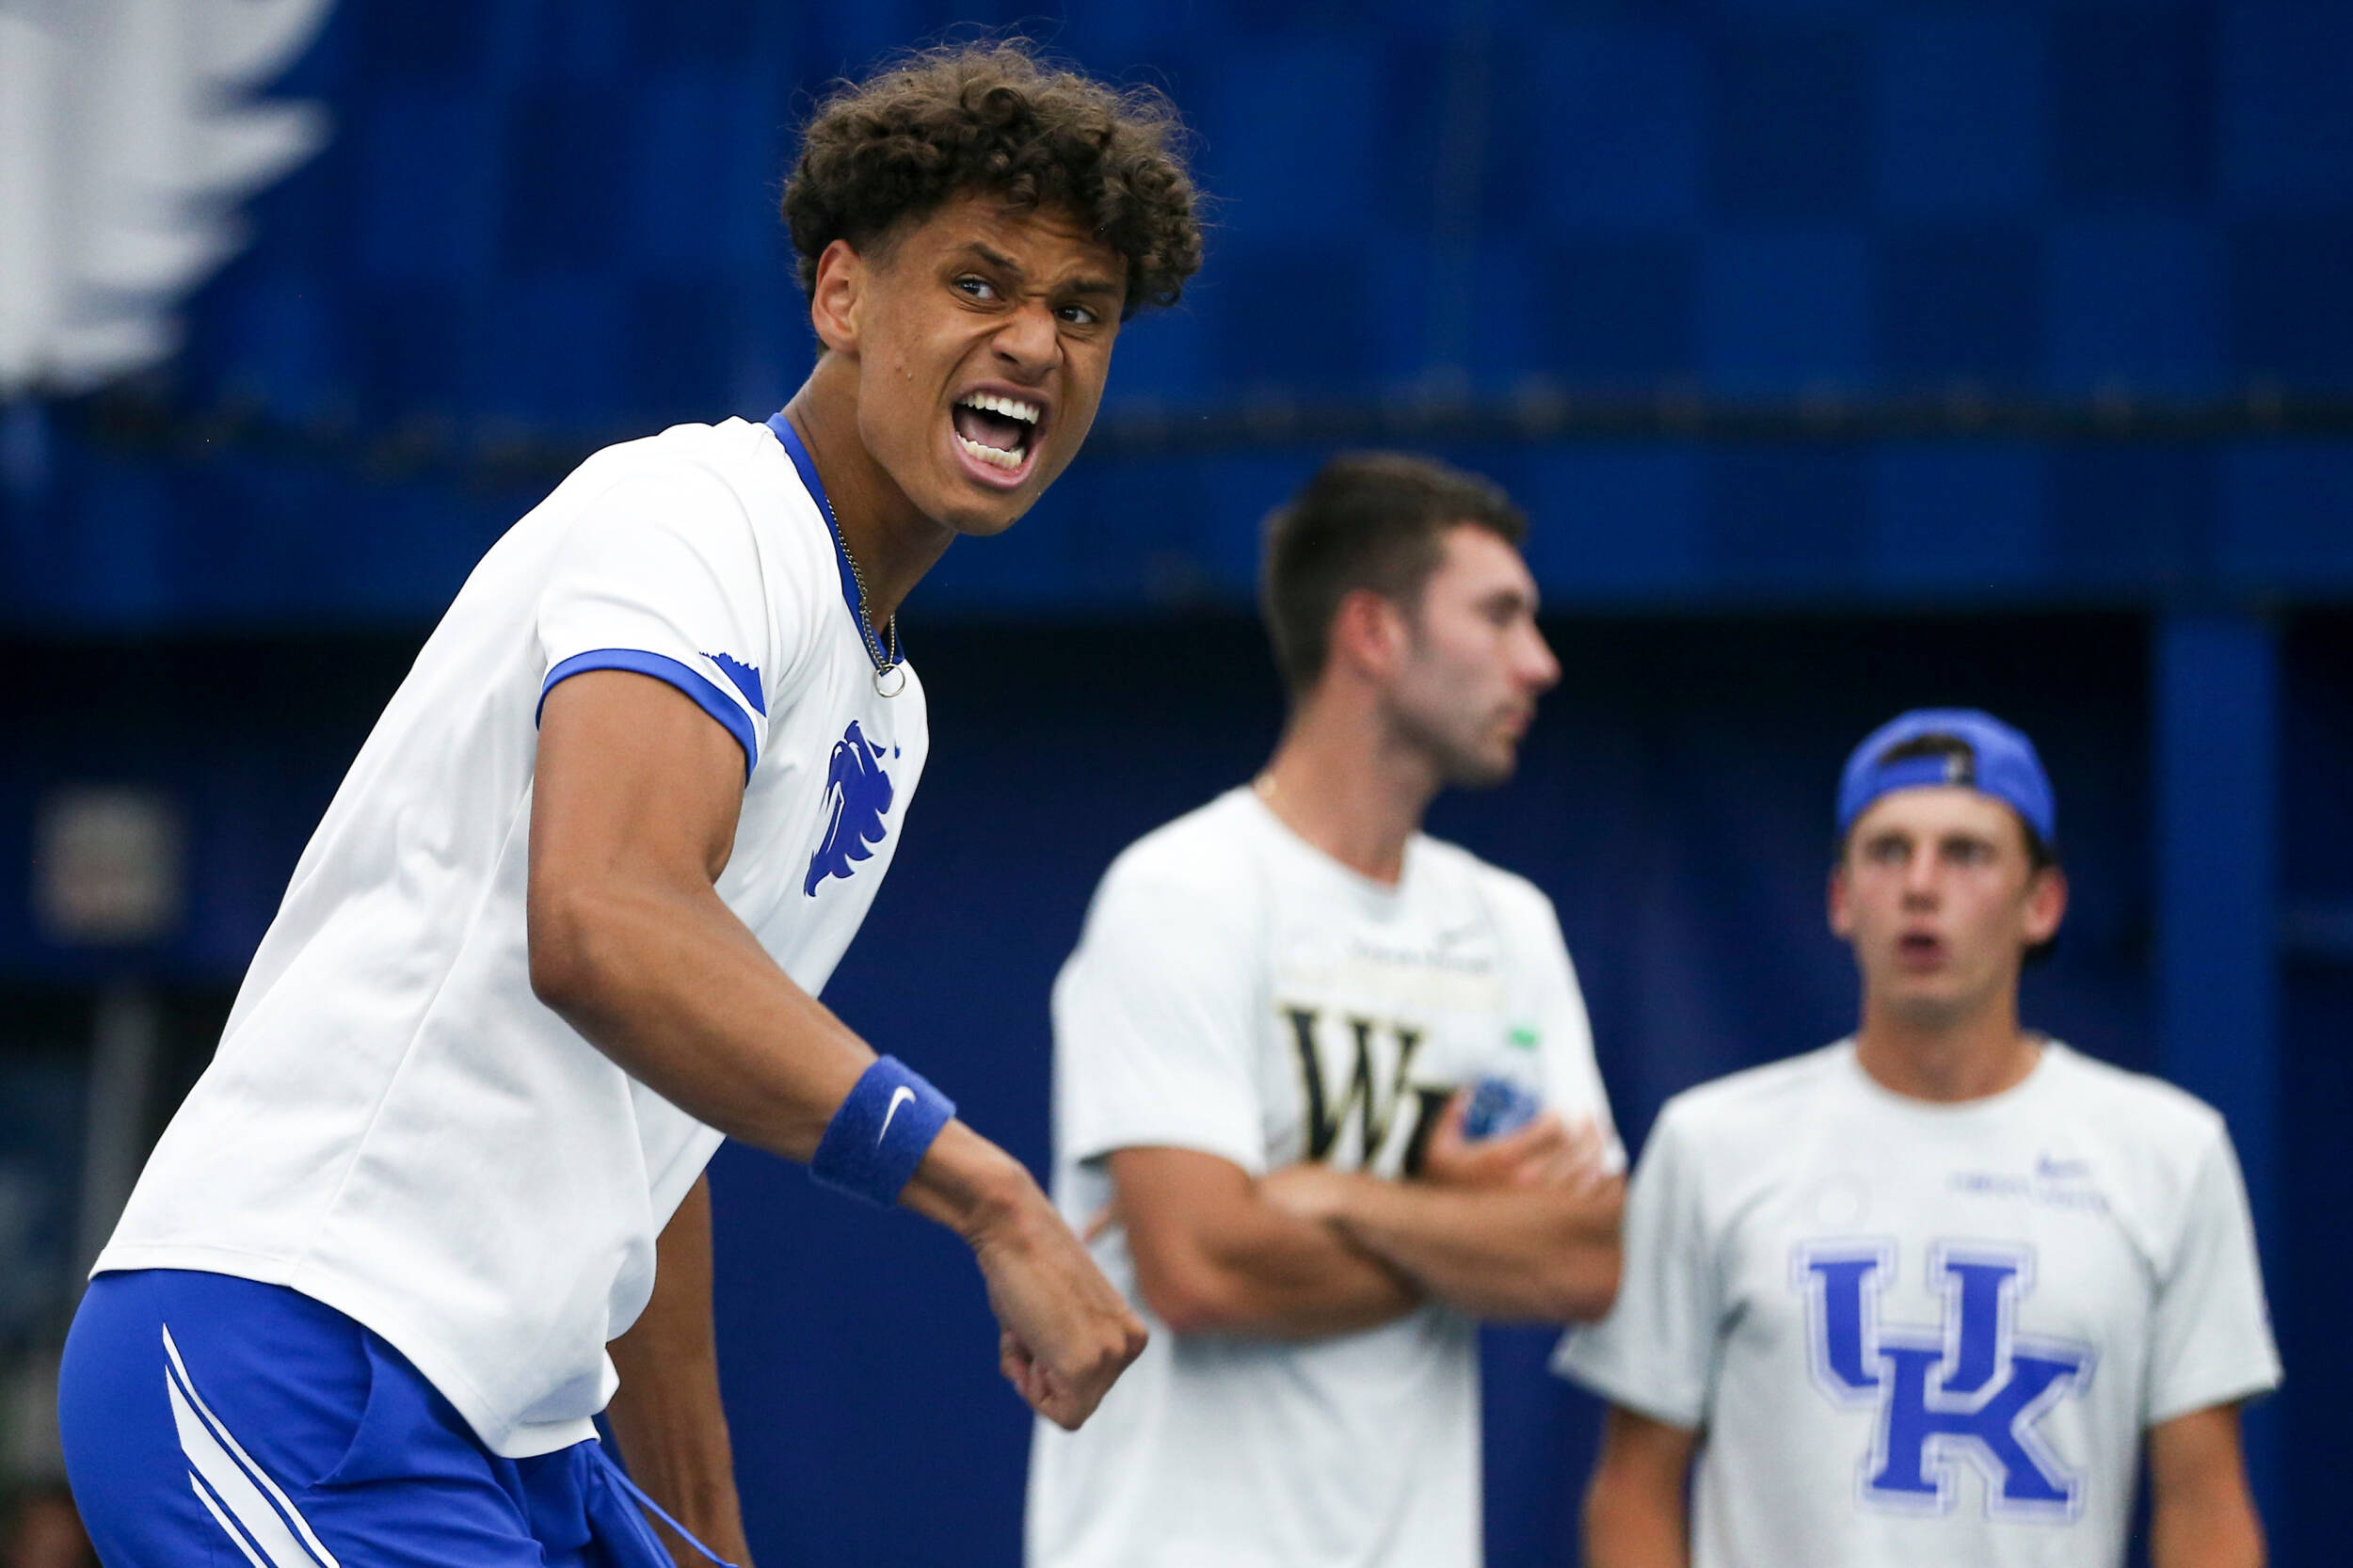 Kentucky Men’s Tennis To Participate in Western & Southern Open